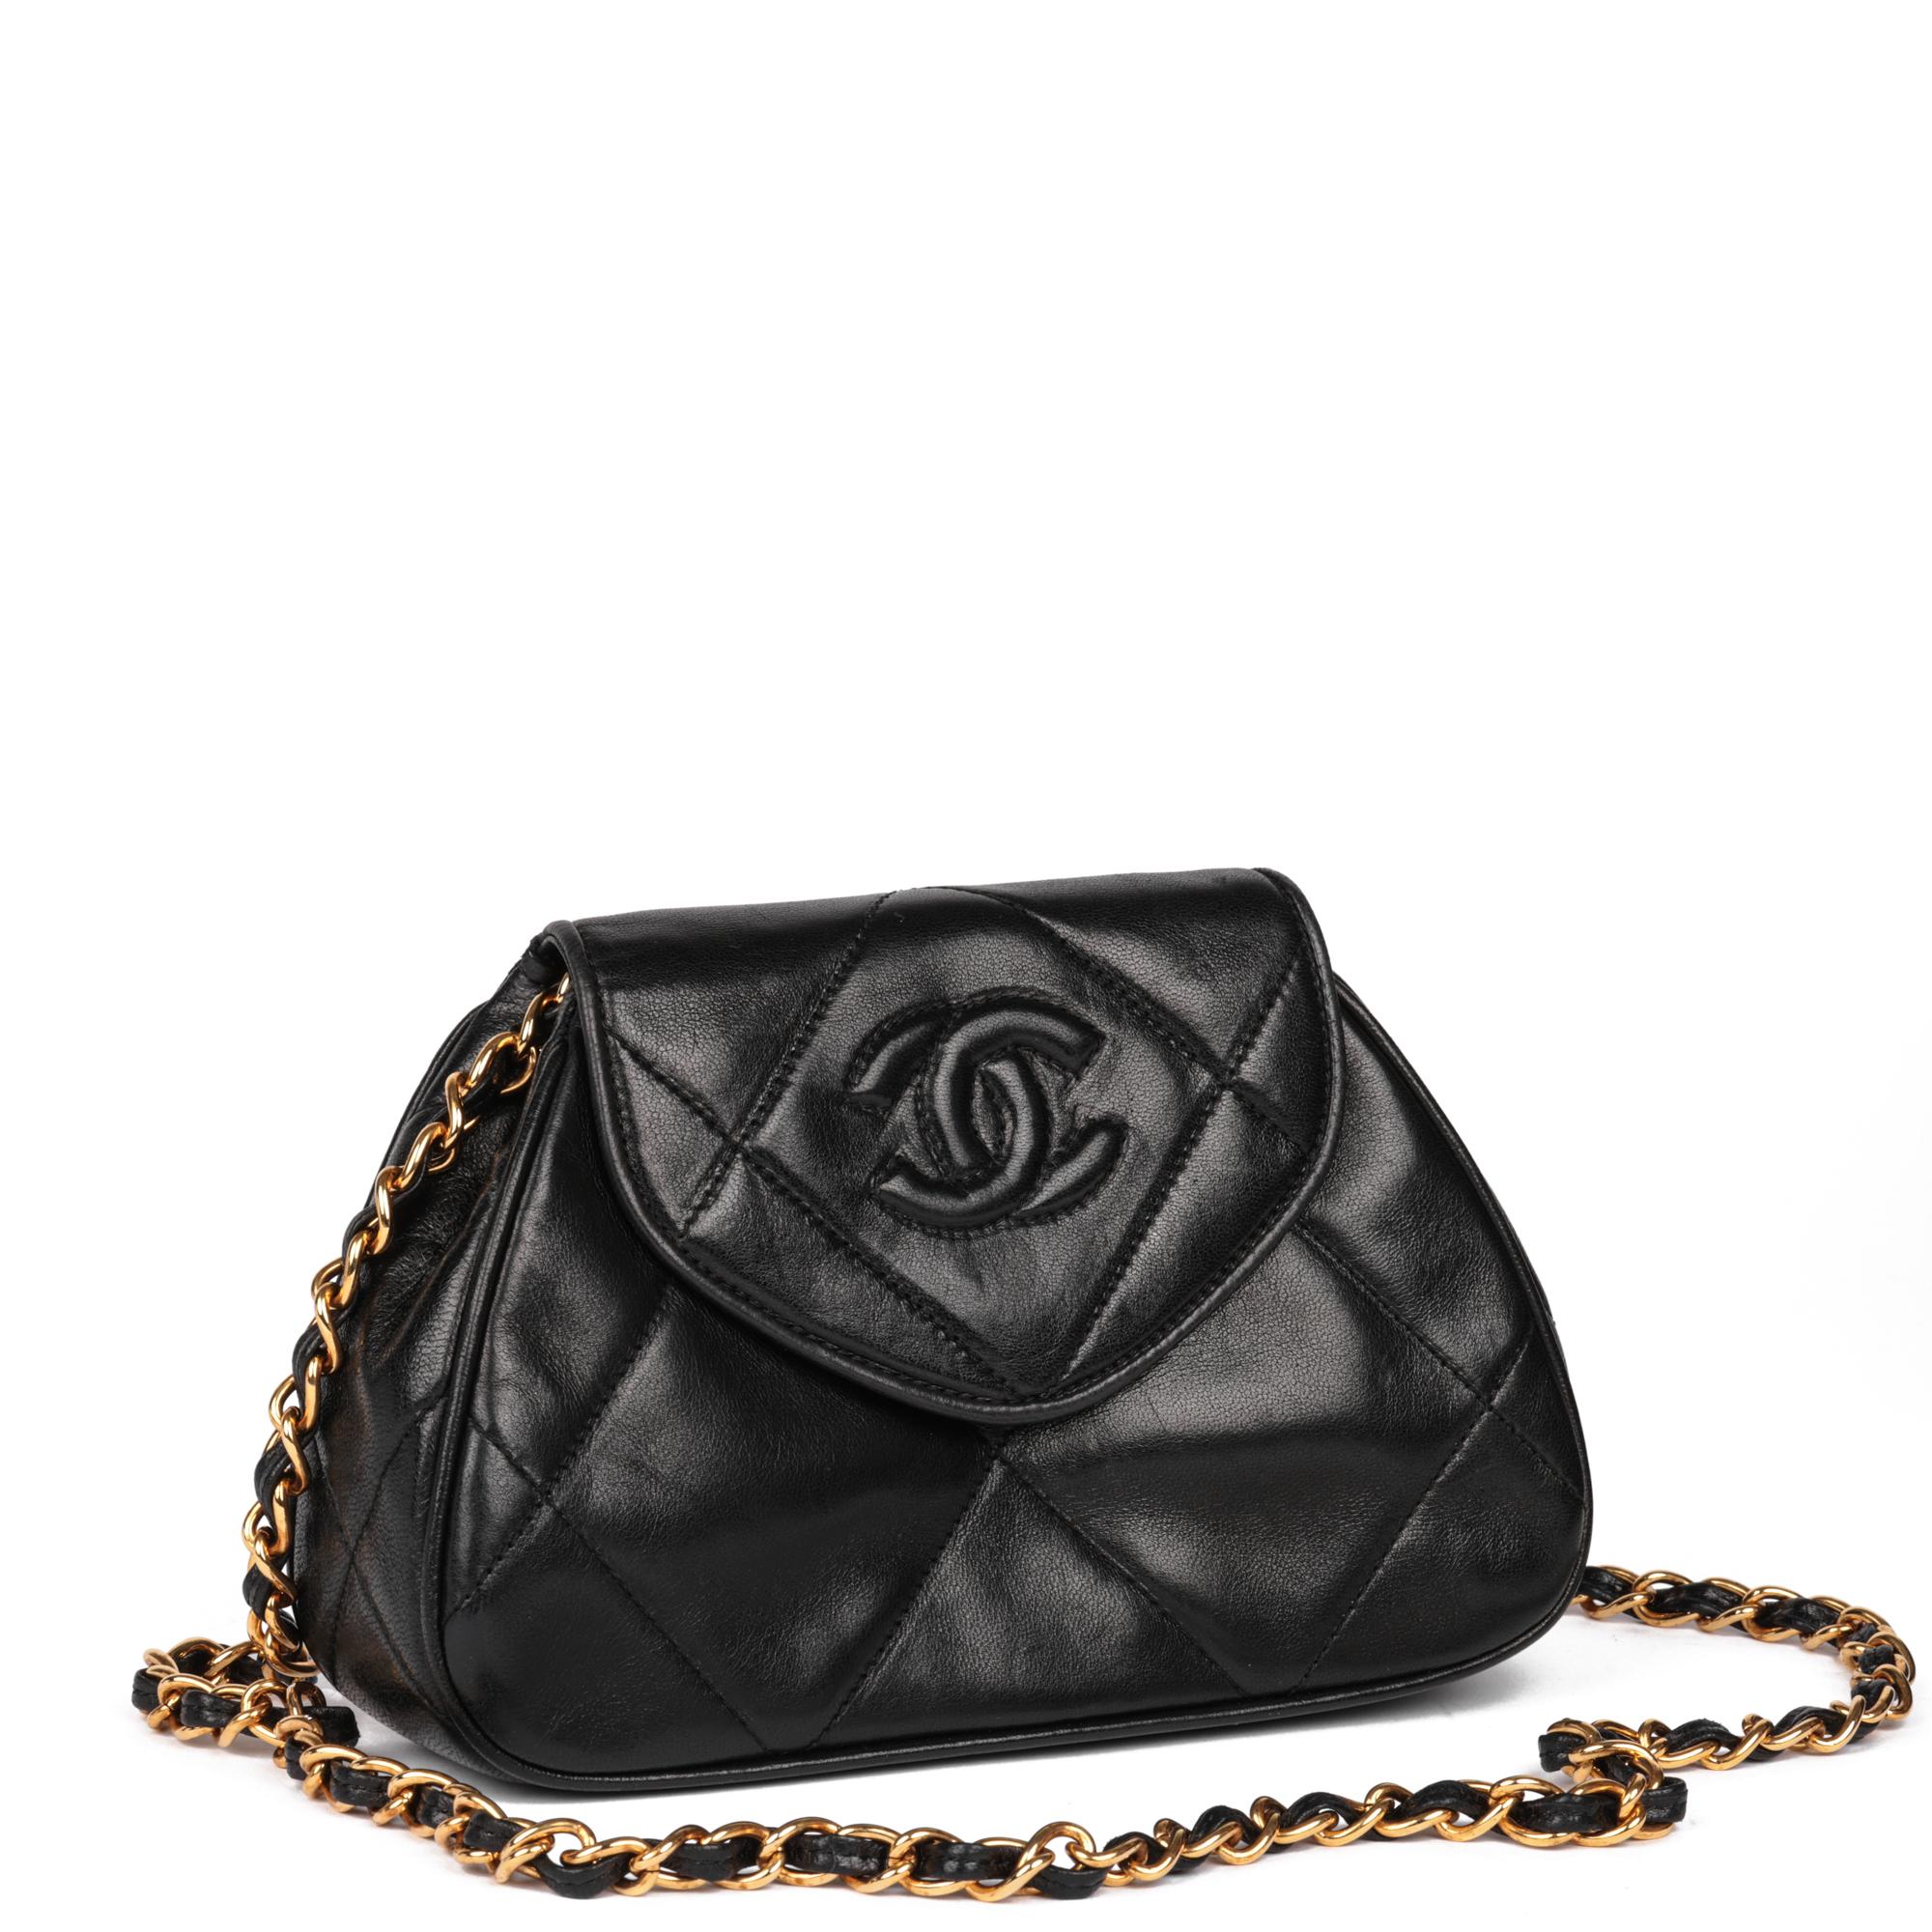 CHANEL
Black Quilted Lambskin Vintage Timeless Mini Pochette

Xupes Reference: HB5135
Serial Number: 1148625
Age (Circa): 1991
Accompanied By: Chanel Dust Bag, Authenticity Card
Authenticity Details: Authenticity Card, Serial Sticker (Made in